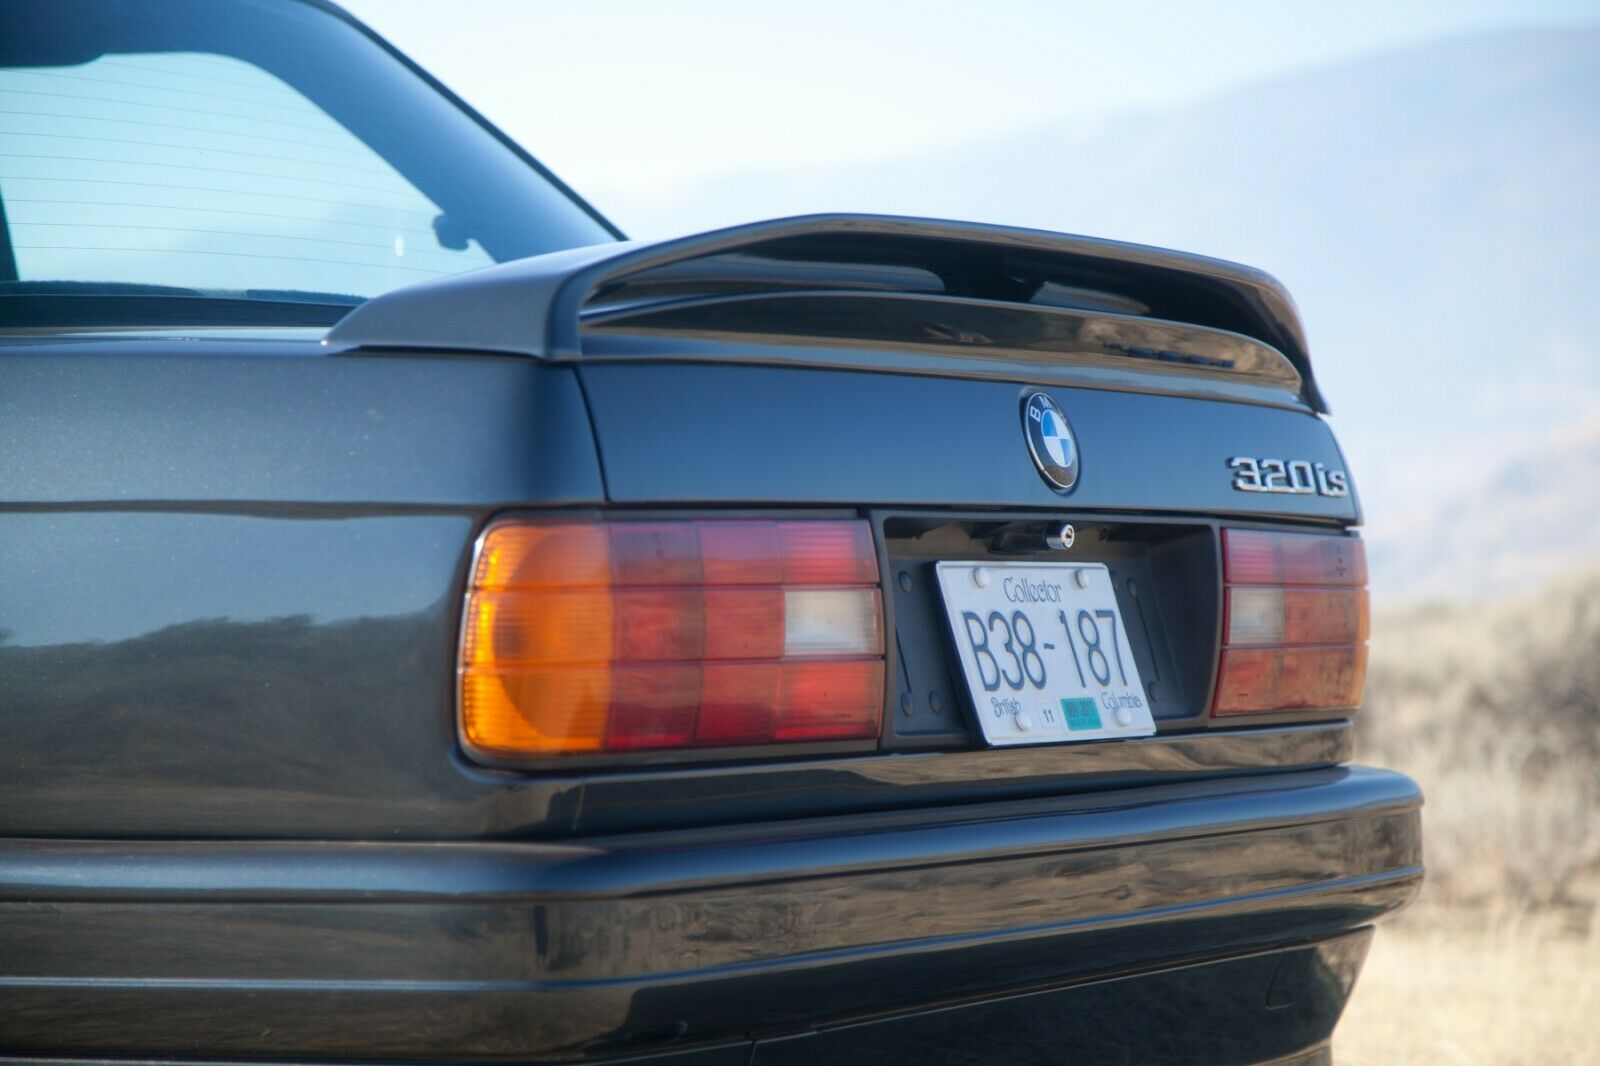 Super Rare BMW 320iS For Sale In Canada Comes From Bimmer's Wonder